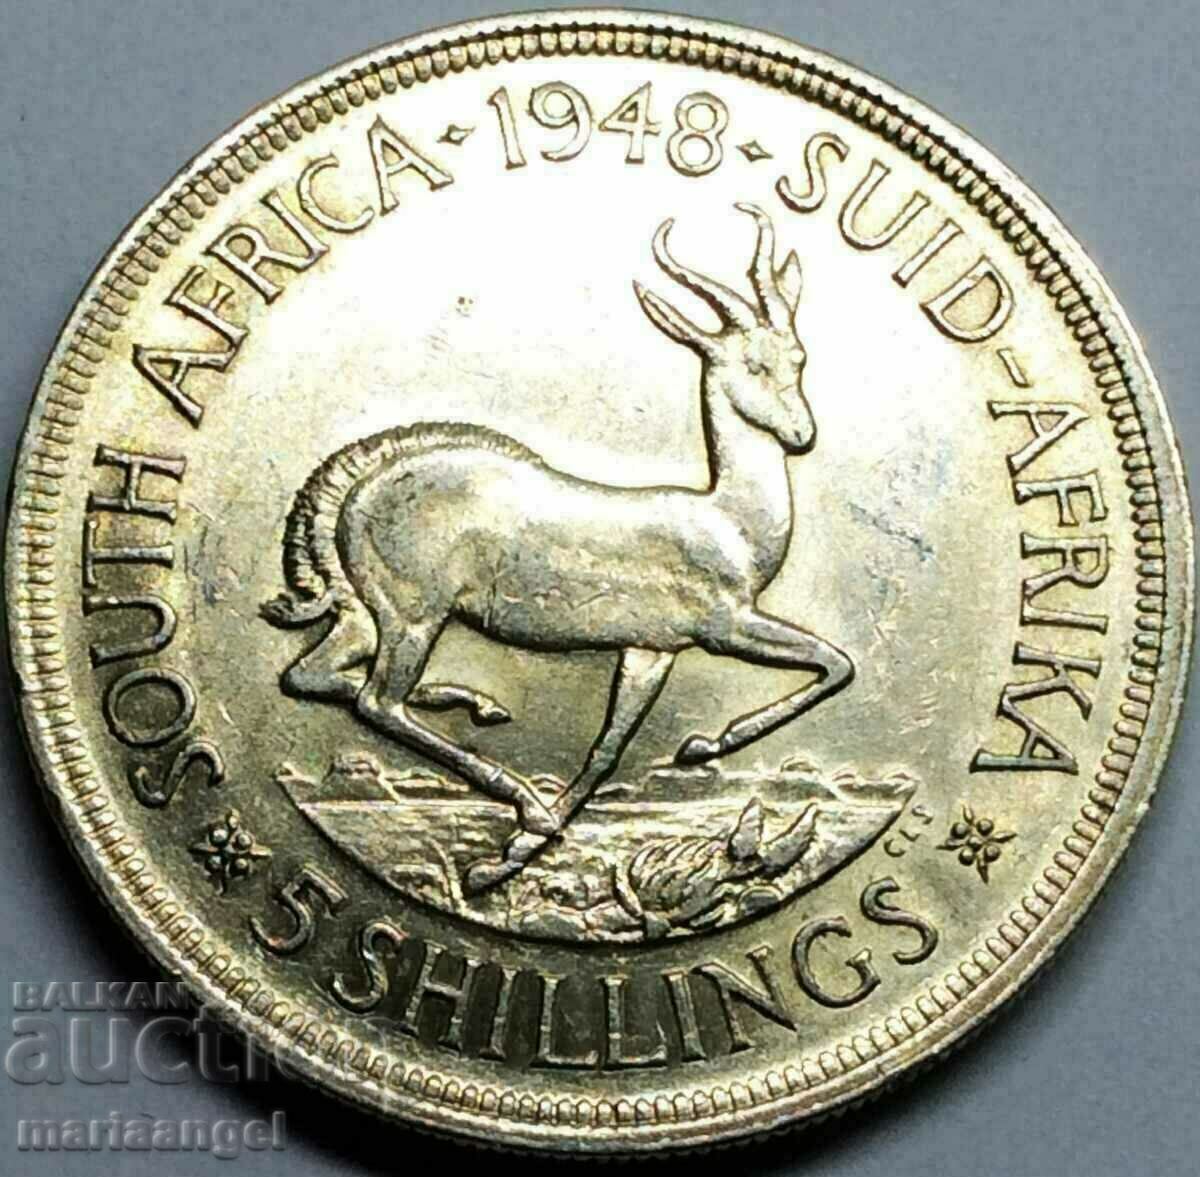 South Africa 5 Shillings George VI Thaler 1948 Gold Patina